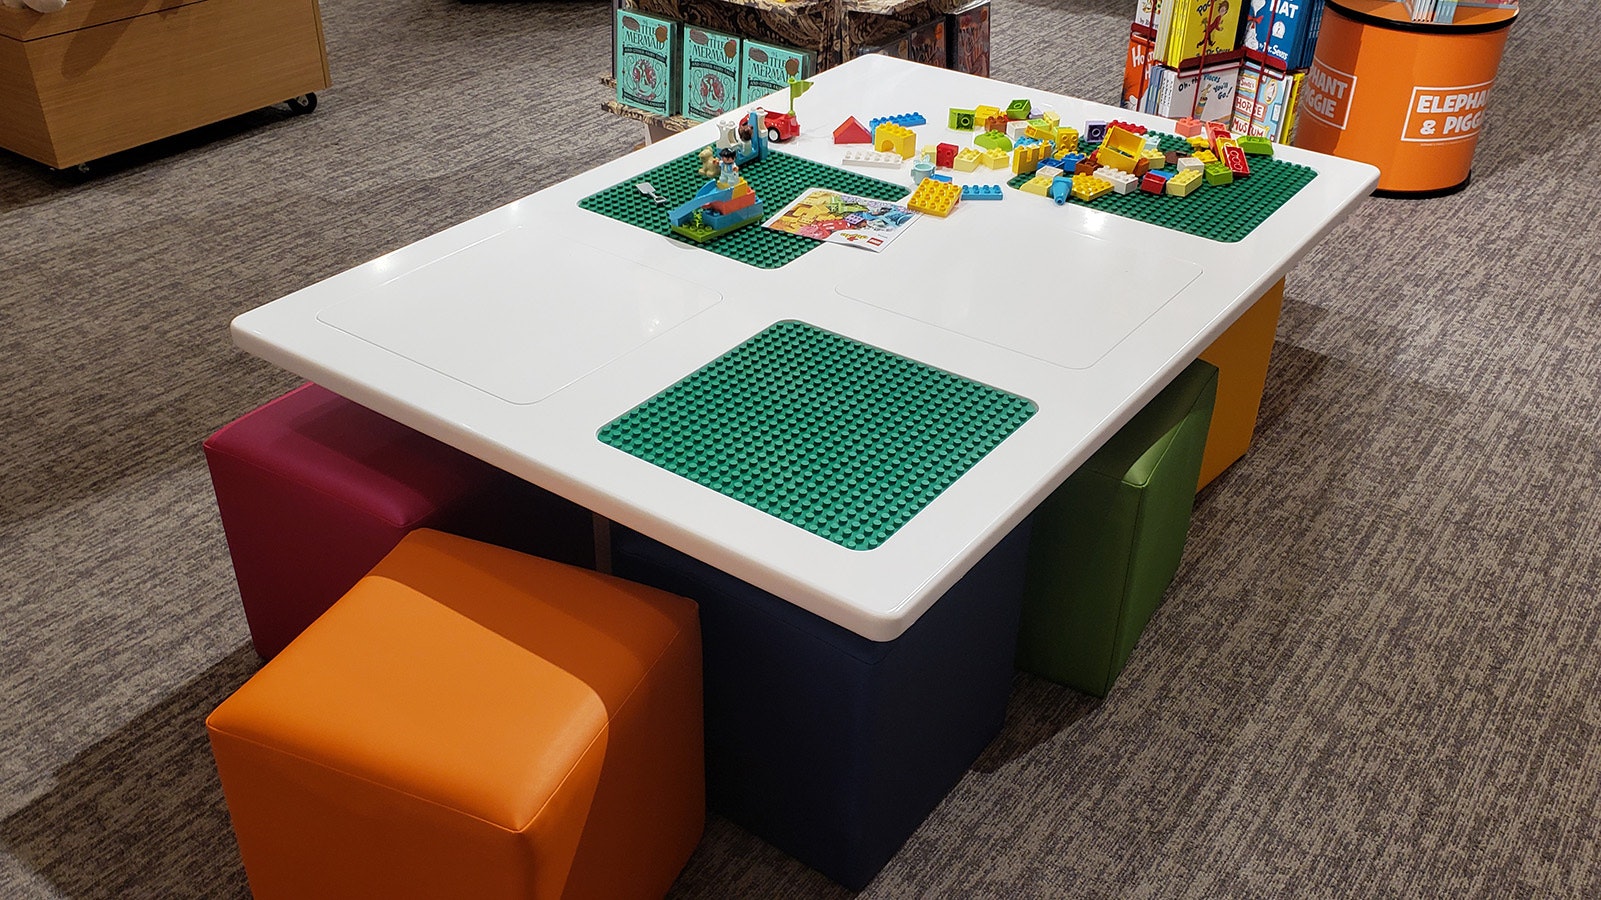 There's going to be a nice little Lego table at the Barnes & Noble in Cheyenne.